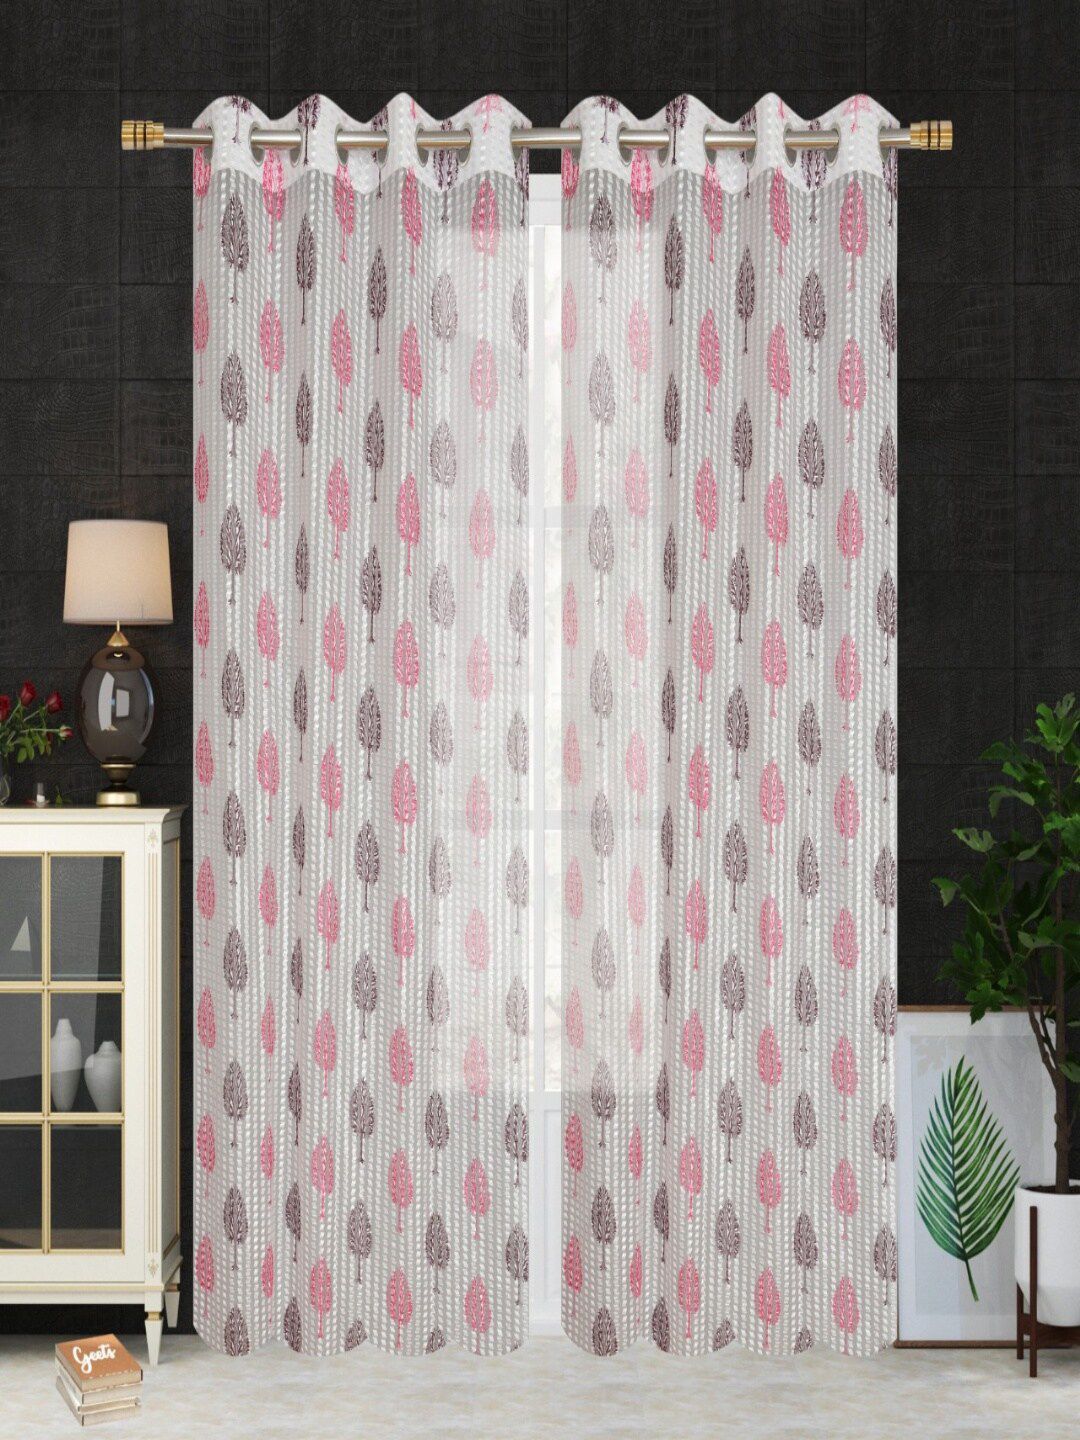 Homefab India Pink & White Floral Sheer Long Door Curtain Set of 2 Price in India